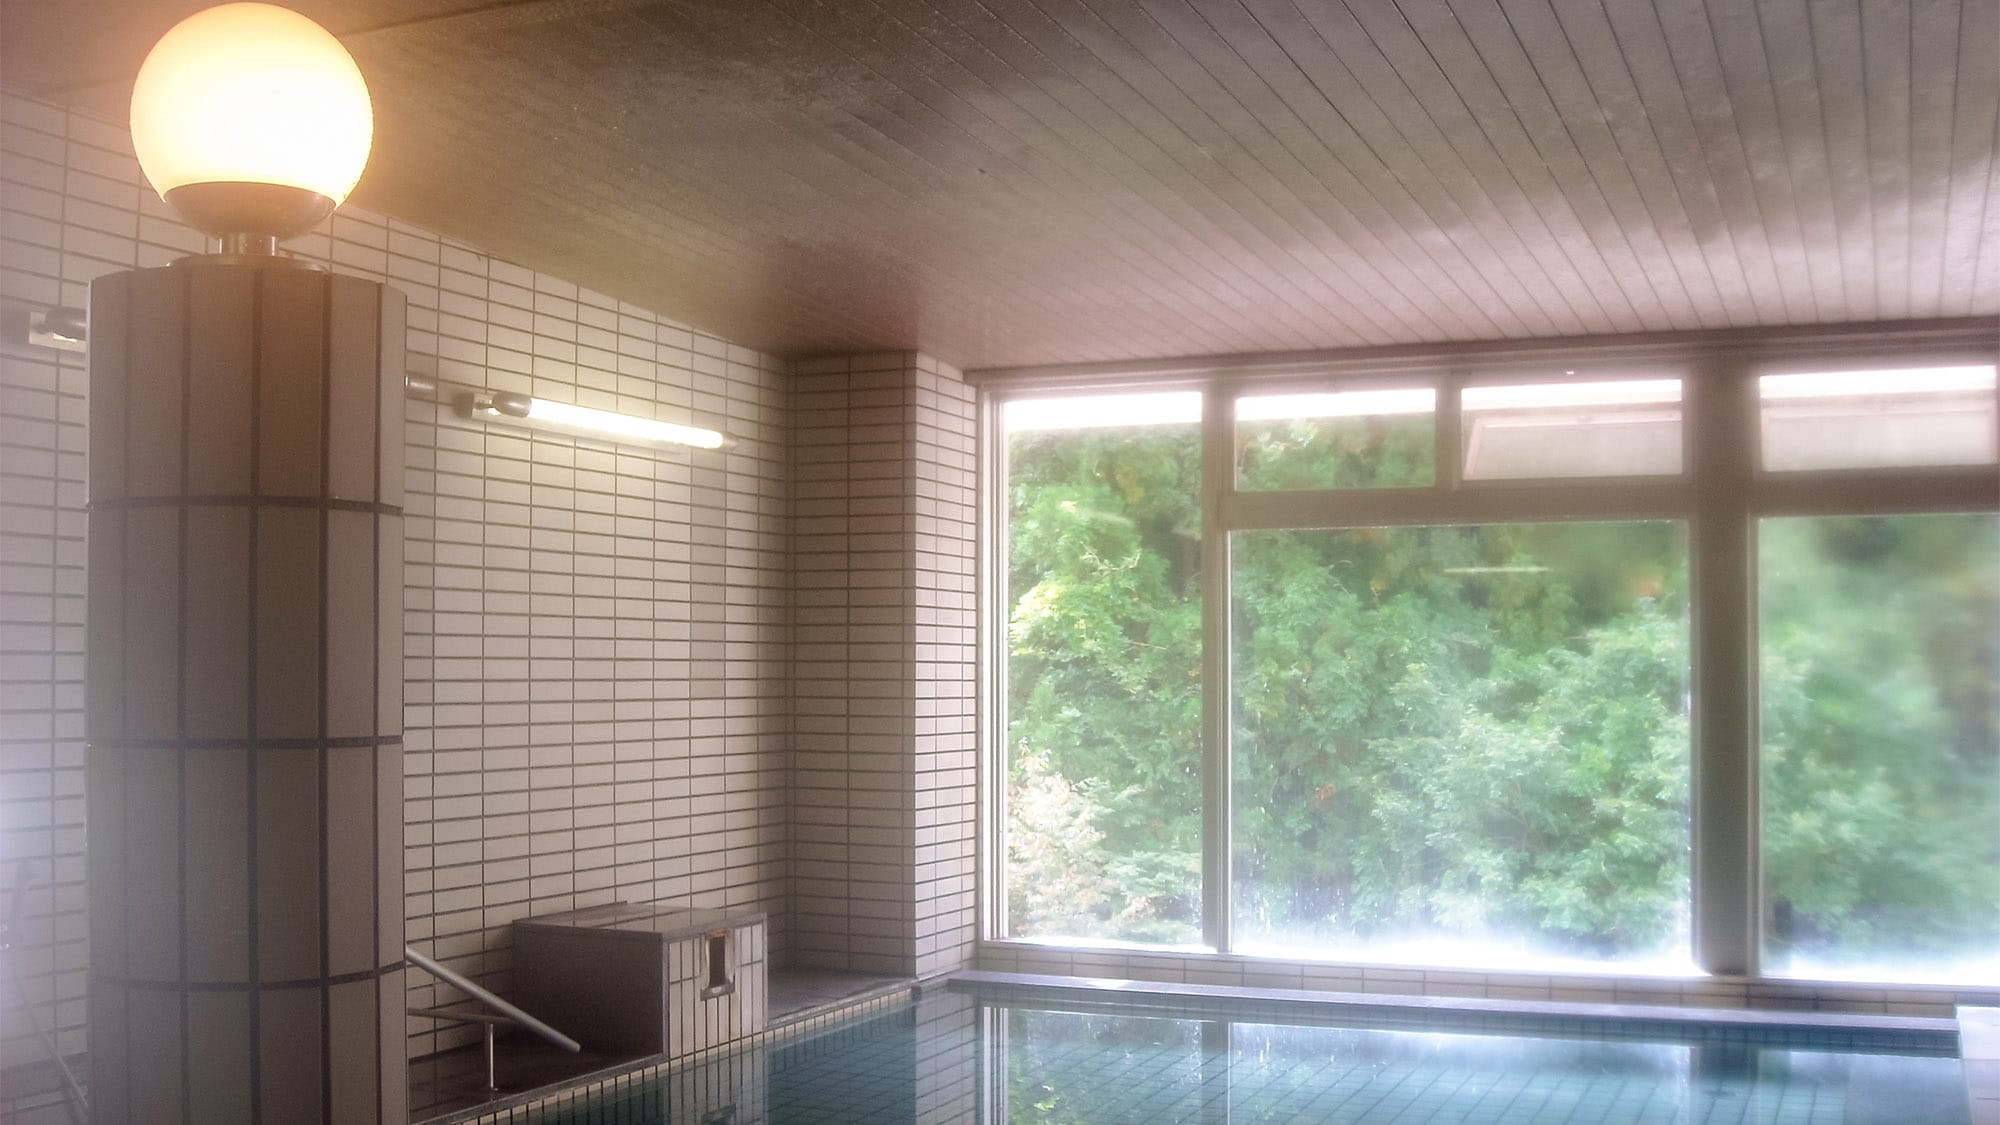 ・ [Onsen] From the core of your body to the warmth while gazing at the nature of Nosegawa Village